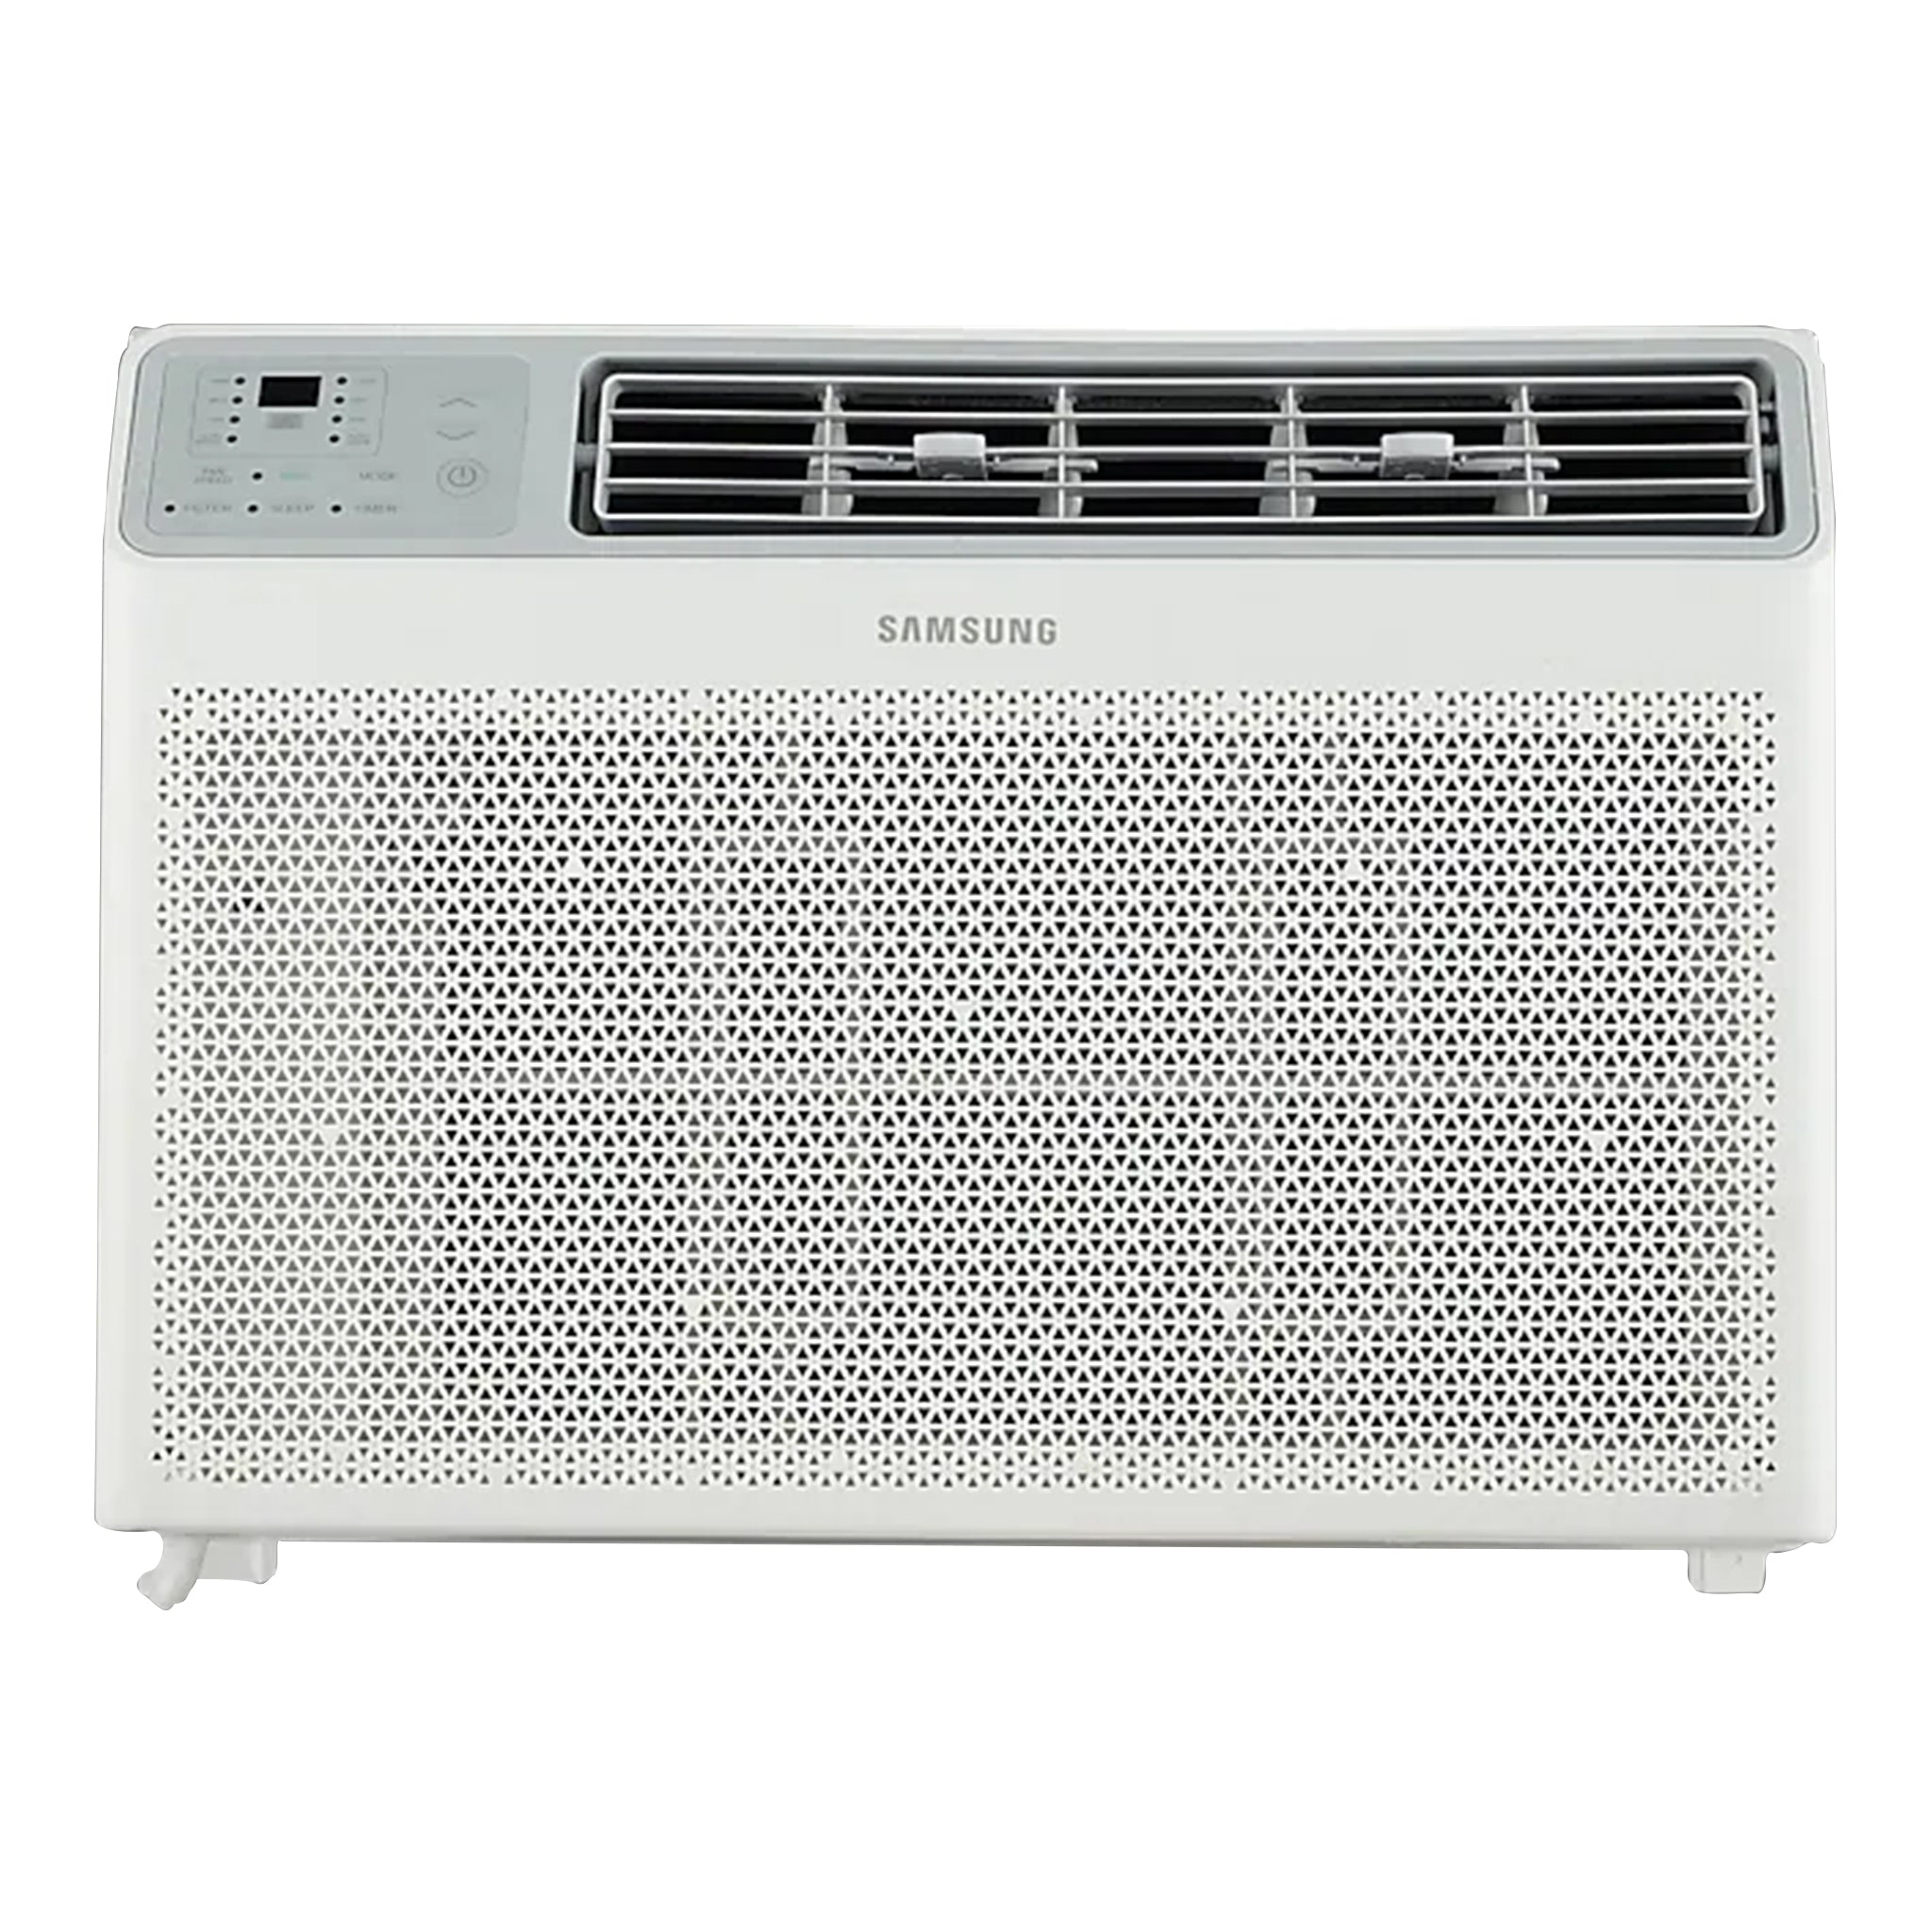 SAMSUNG AW12CGHLAWKNTC 1.5HP Window-type Compact Air Conditioner Samsung